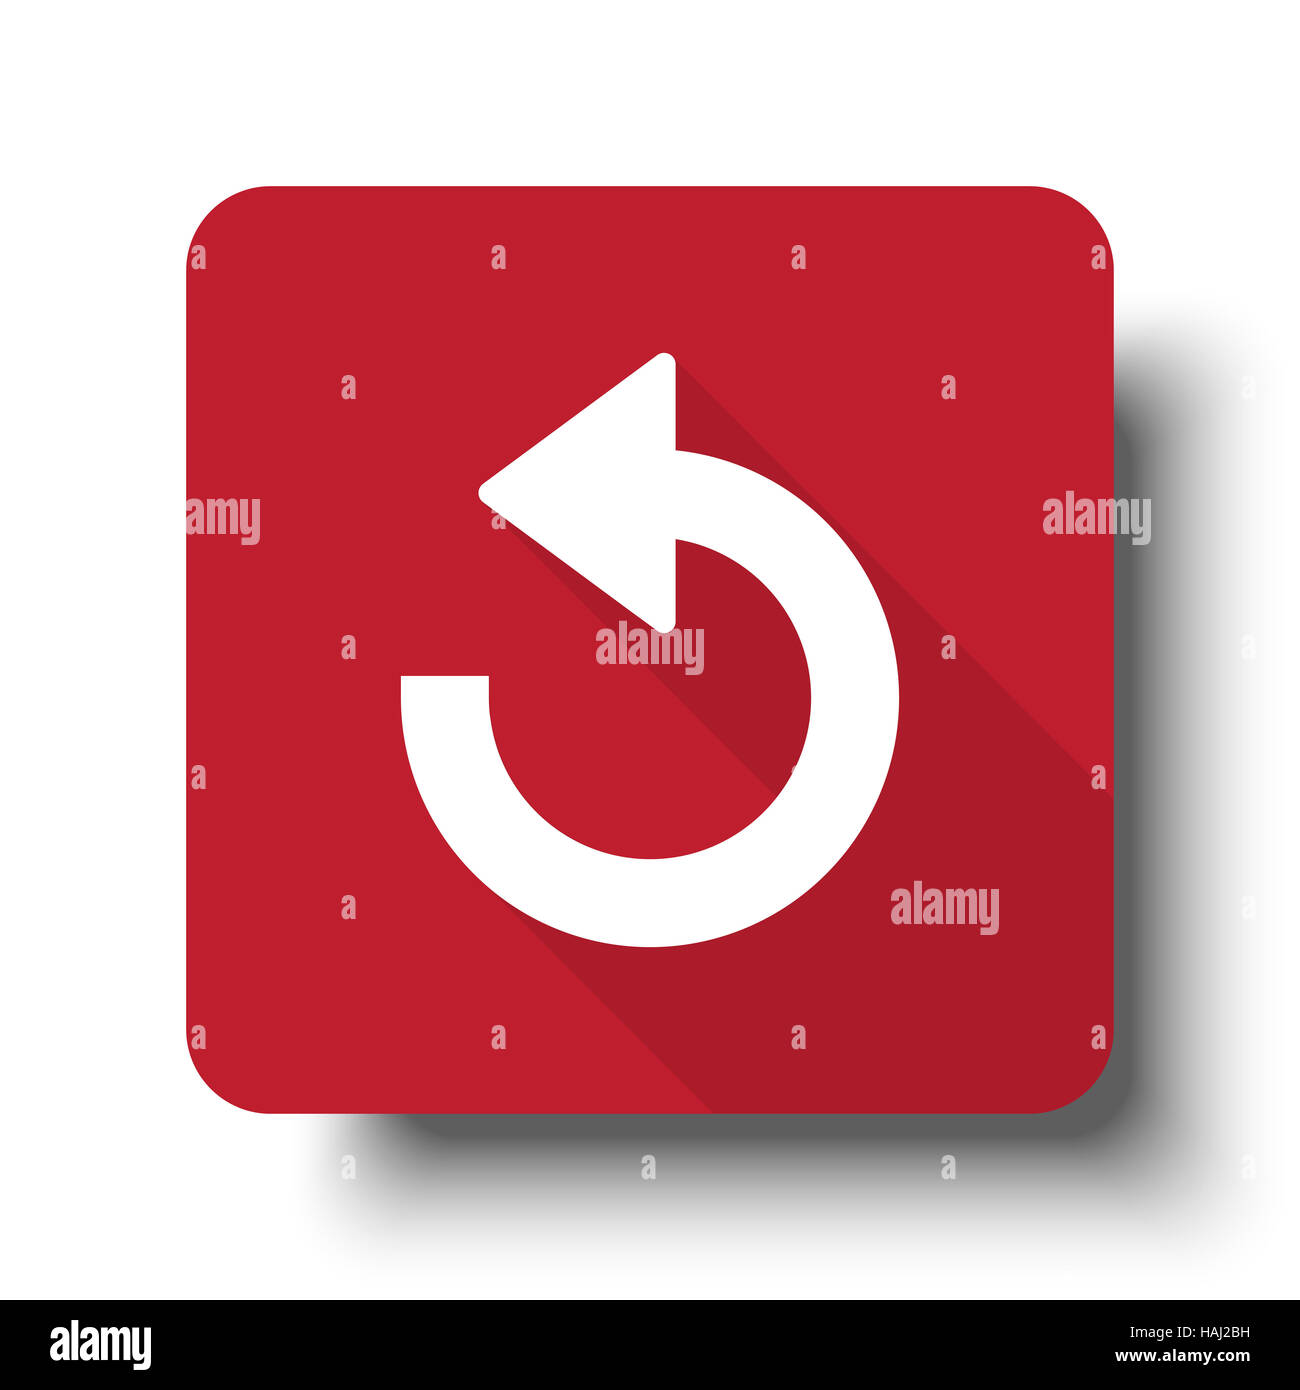 Flat Undo web icon on red button with drop shadow Stock Photo